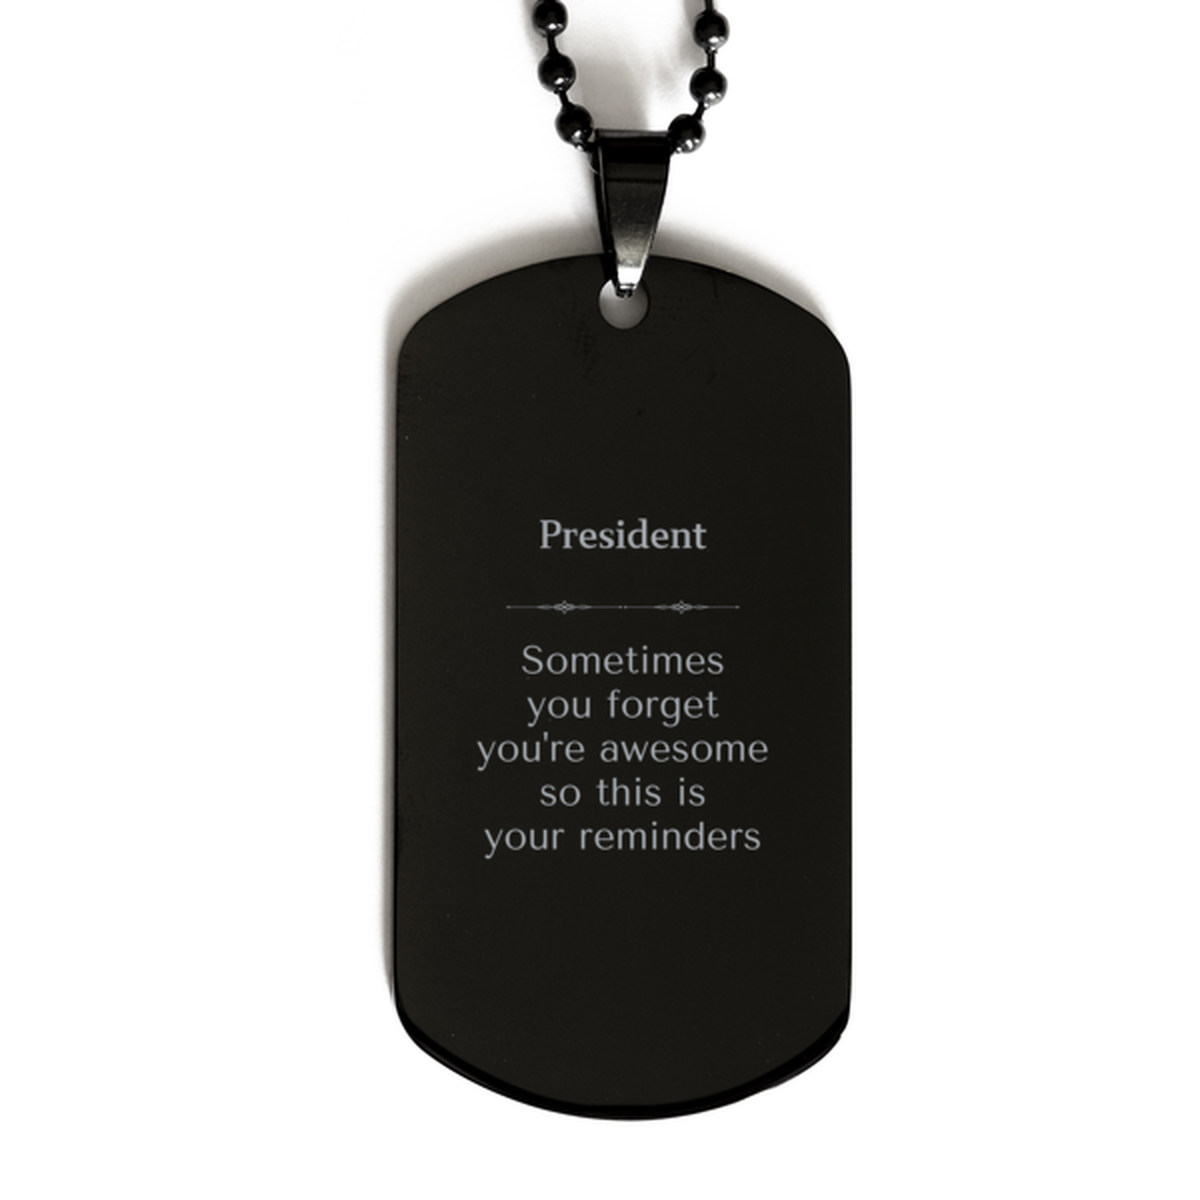 Sentimental President Black Dog Tag, President Sometimes you forget you're awesome so this is your reminders, Graduation Christmas Birthday Gifts for President, Men, Women, Coworkers